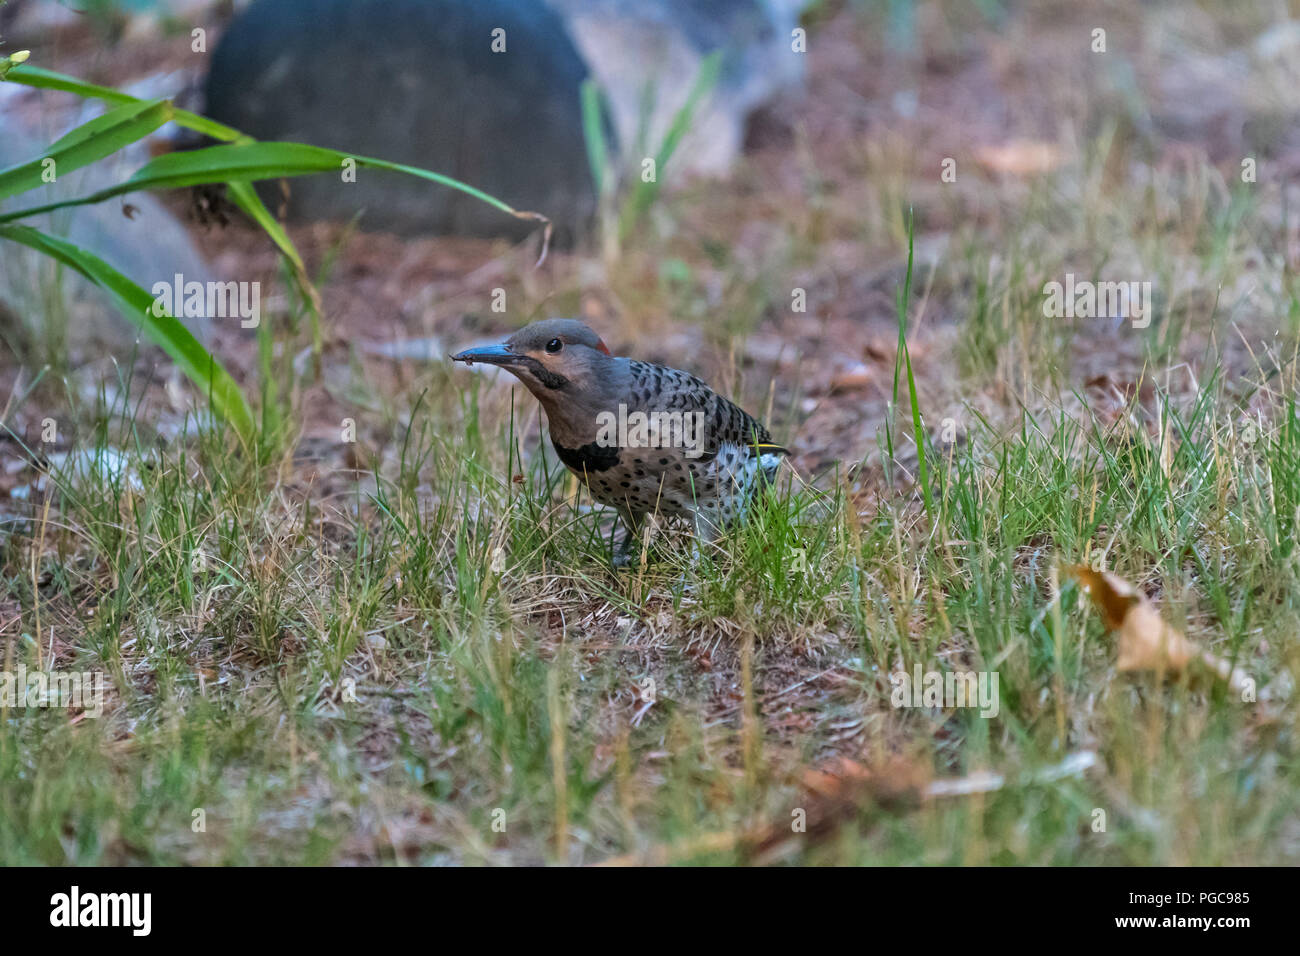 Northern Flicker (Colaptes auratus) woodpecker standing on the ground. Stock Photo